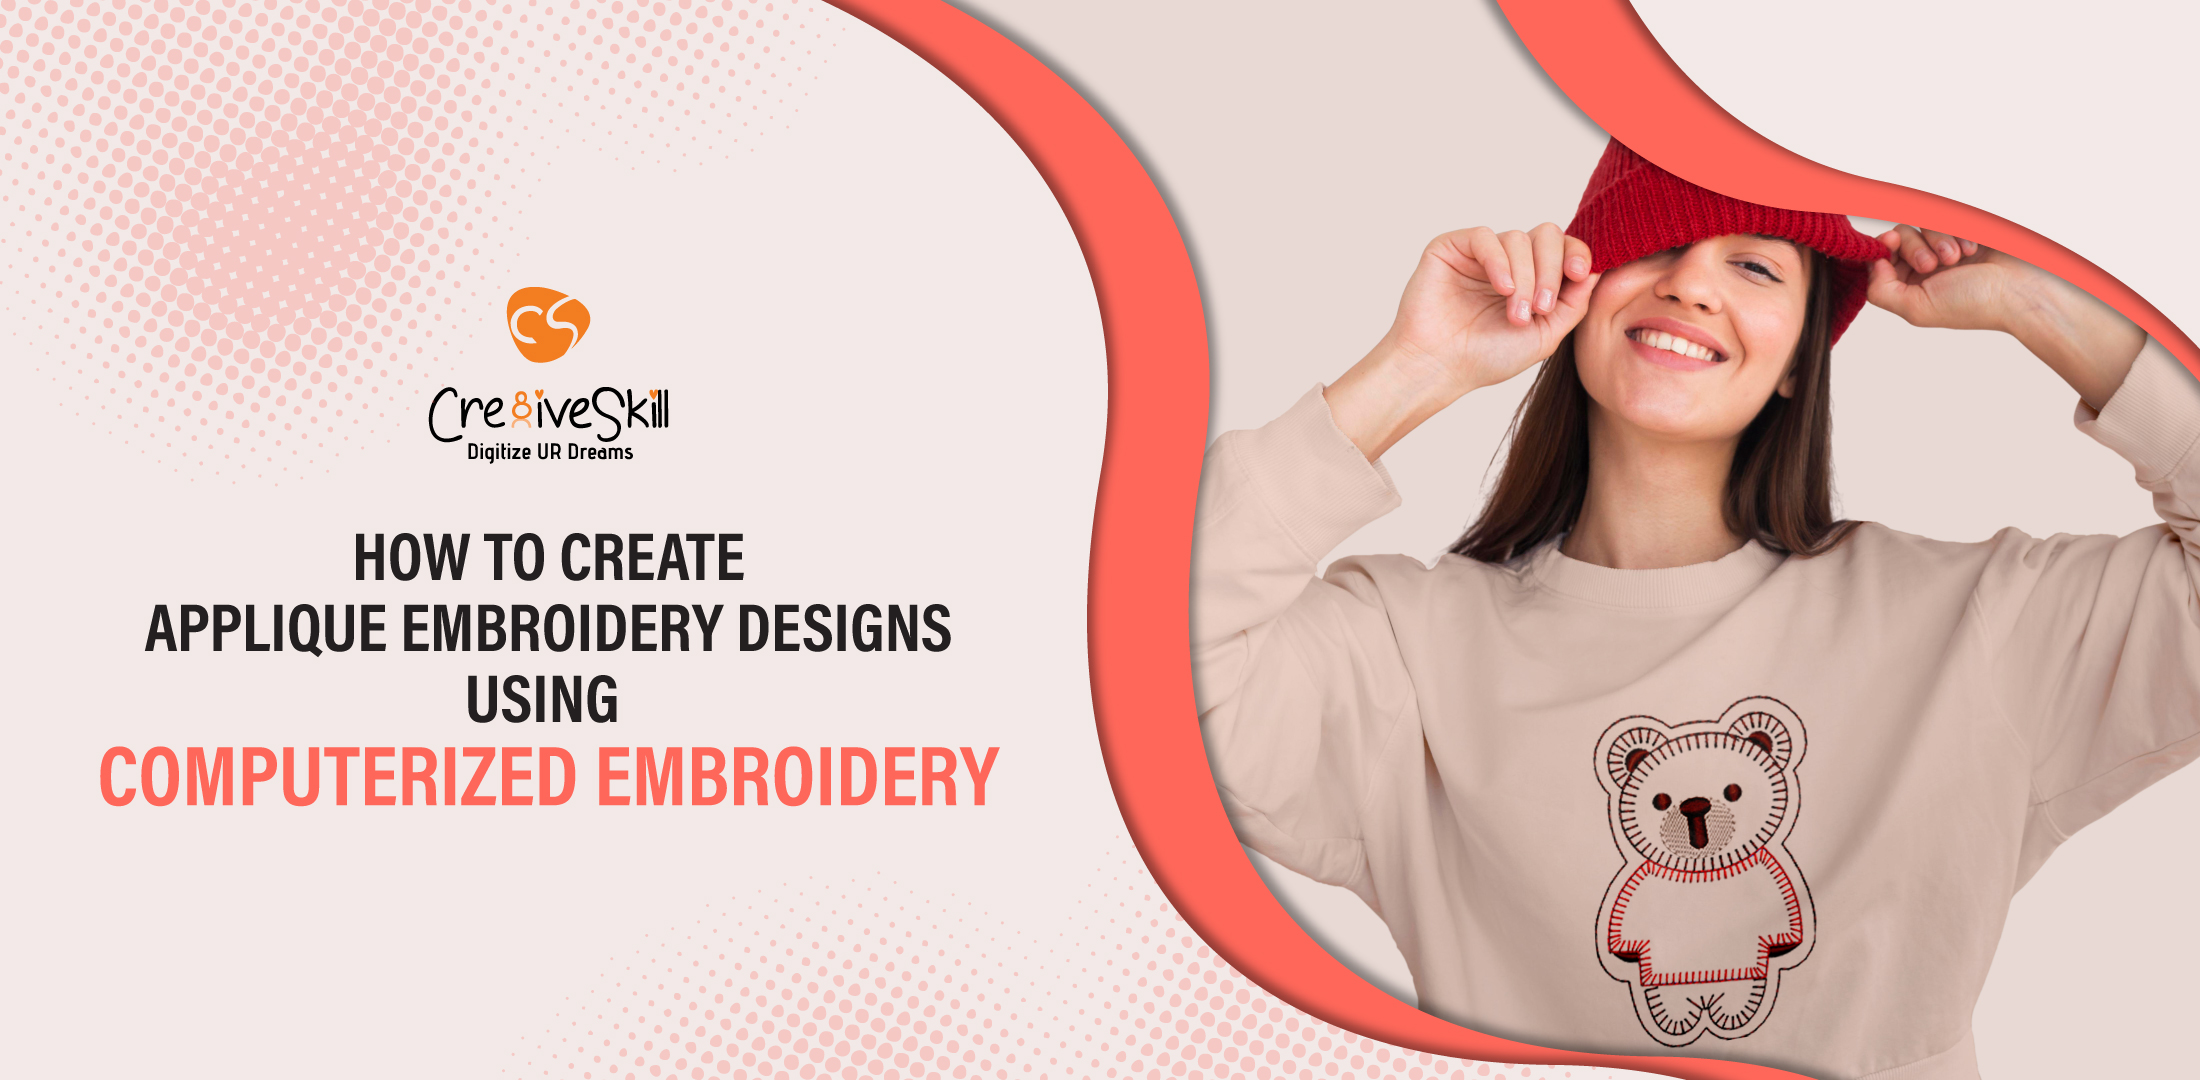 How To Create Applique Embroidery Designs Using Computerized Embroidery